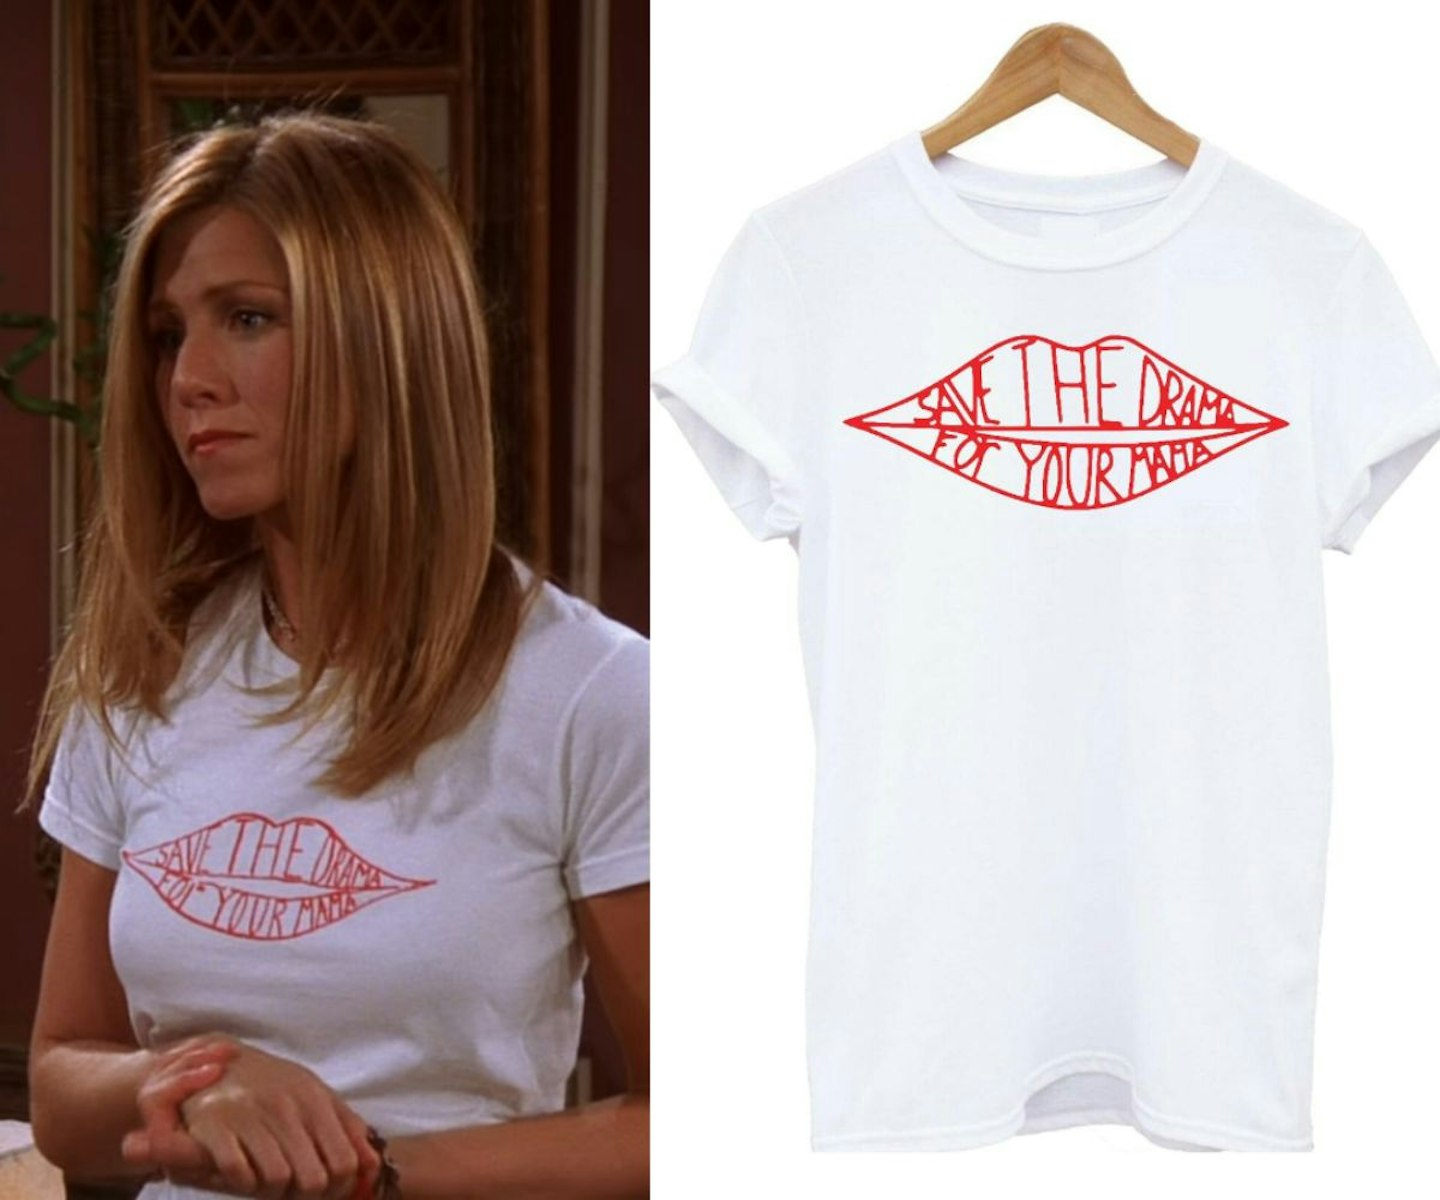 Rachel's 'Save The Drama For Your Mama' T-shirt